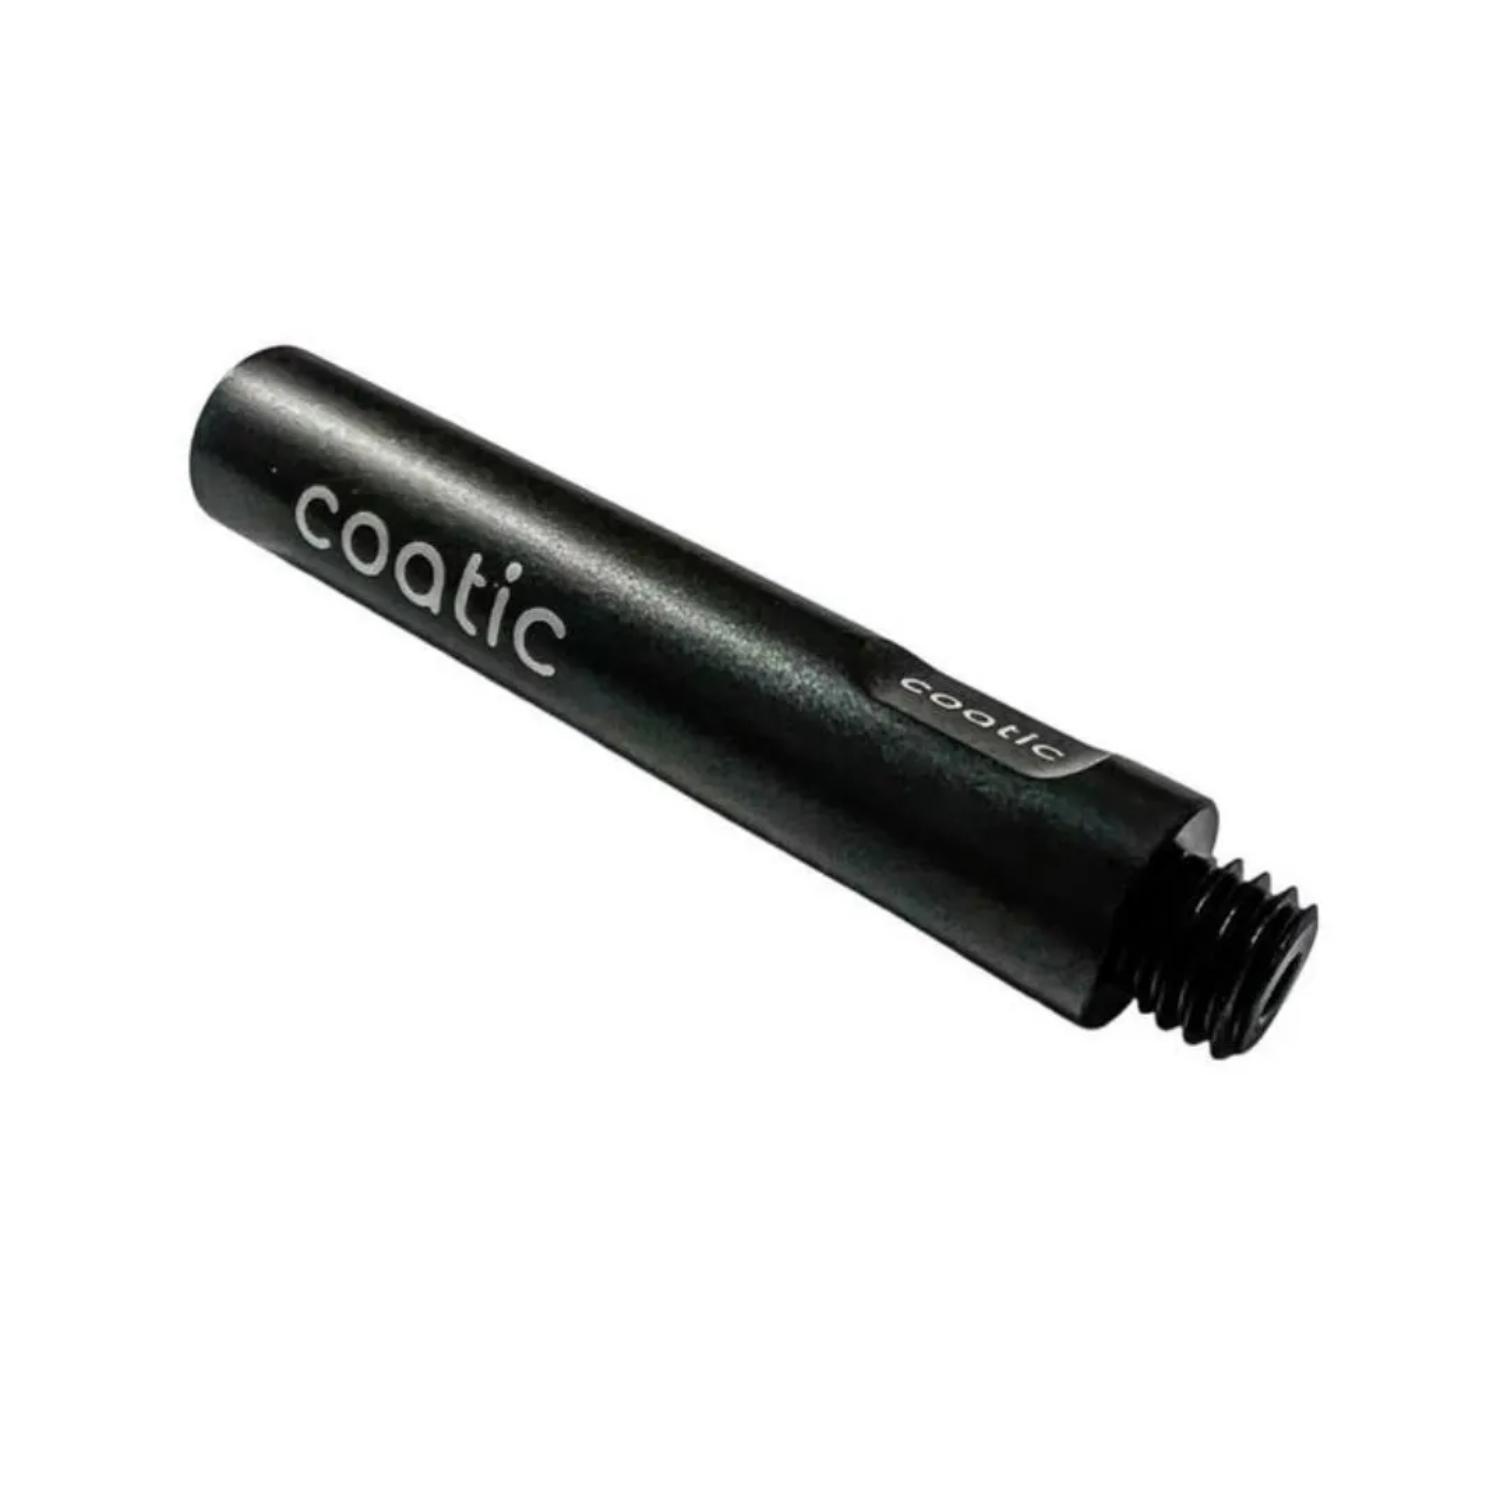 Coatic© 70mm Extension bar for Flex Pxe 80 Polisher